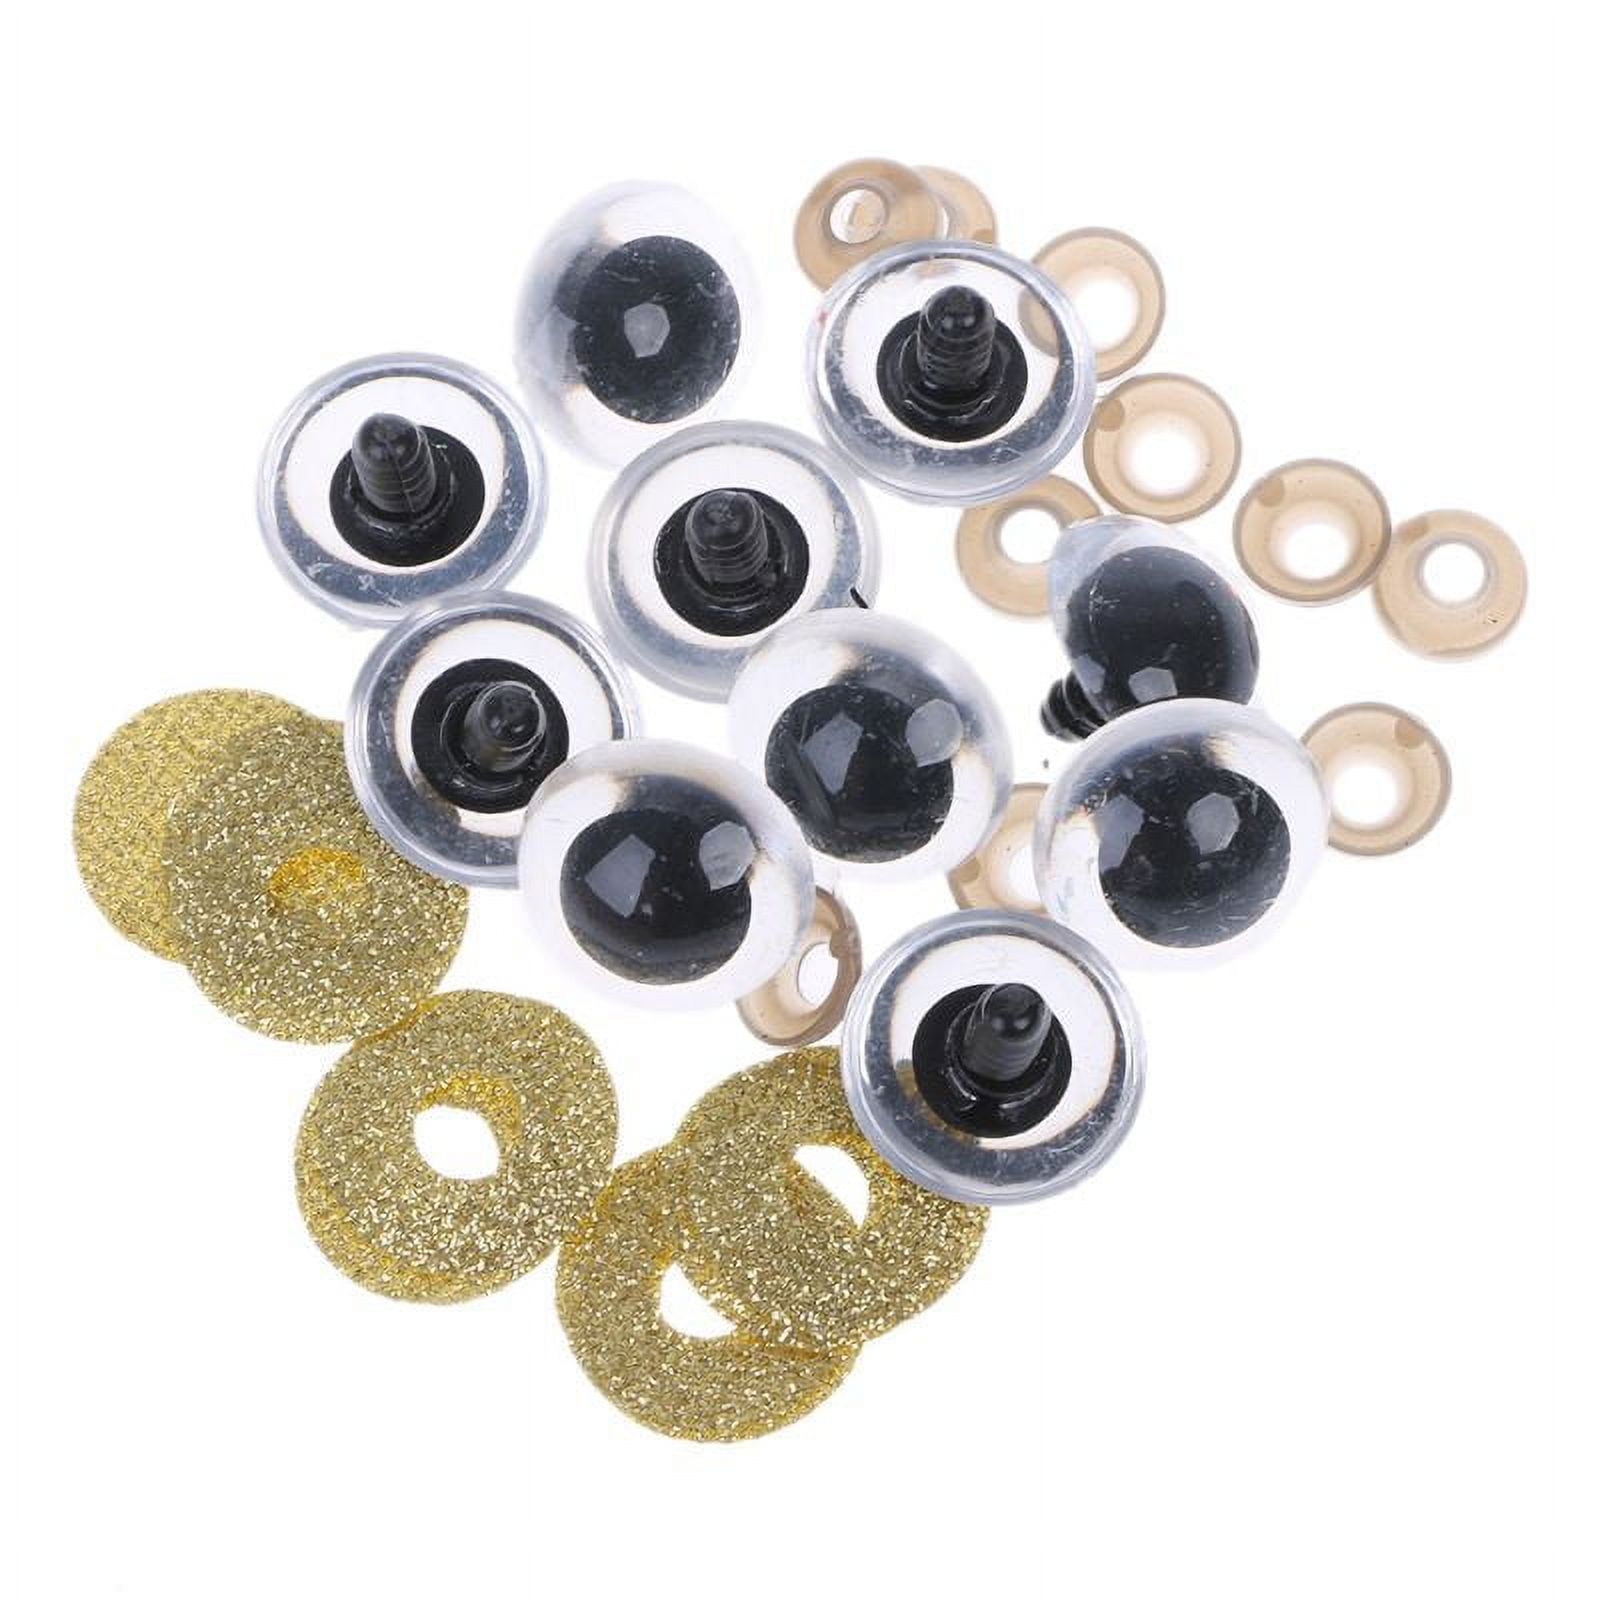 KOOSUFA 12 Pcs 6 Color Glitter Safety Eyes 9mm 12mm 14mm 16mm 18mm 20mm  25mm Premium Round Amigurumi Eyes with Washers for Doll Teddy Bear Puppet  Toy